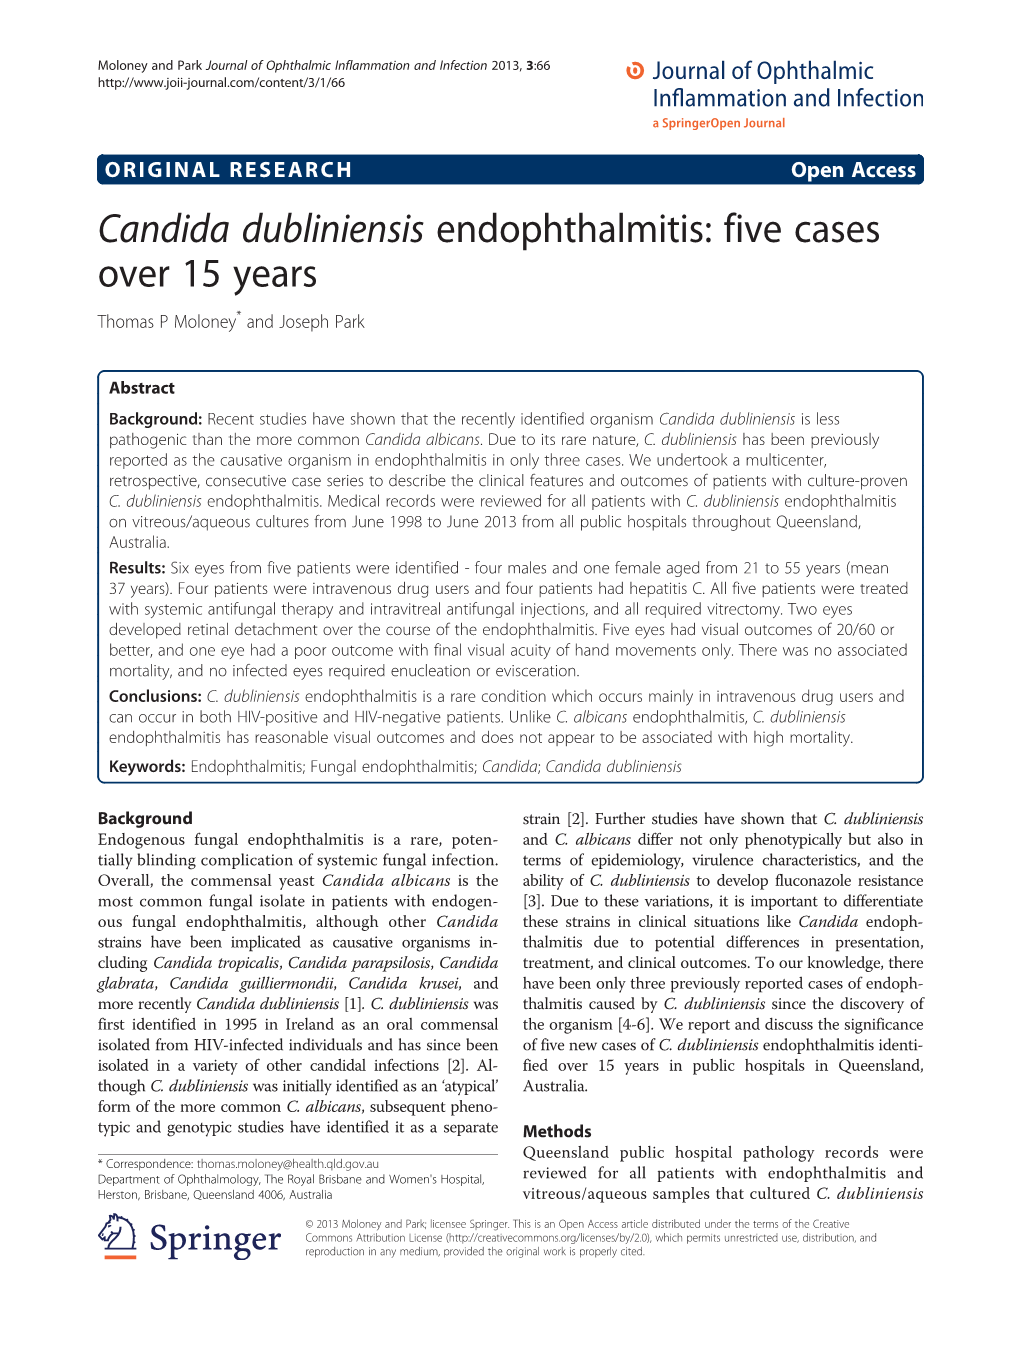 Candida Dubliniensis Endophthalmitis: Five Cases Over 15 Years Thomas P Moloney* and Joseph Park